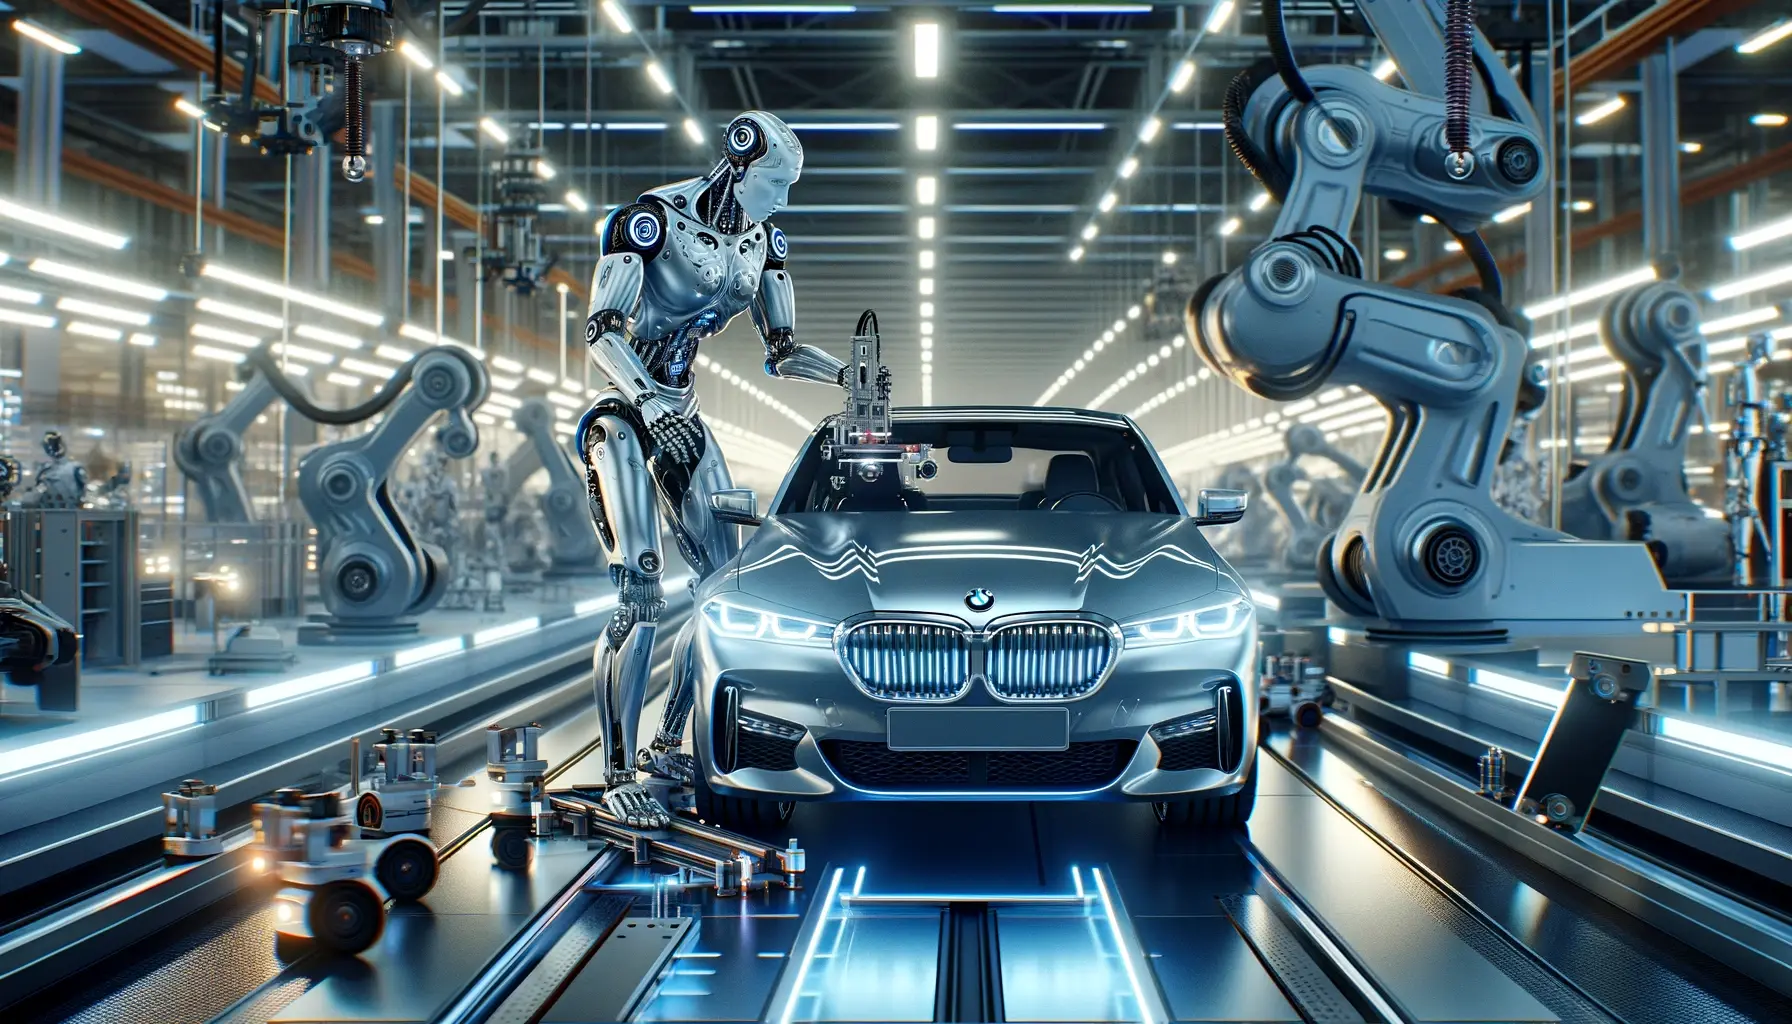 Advanced Humanoid Robots Working in BMW Factory